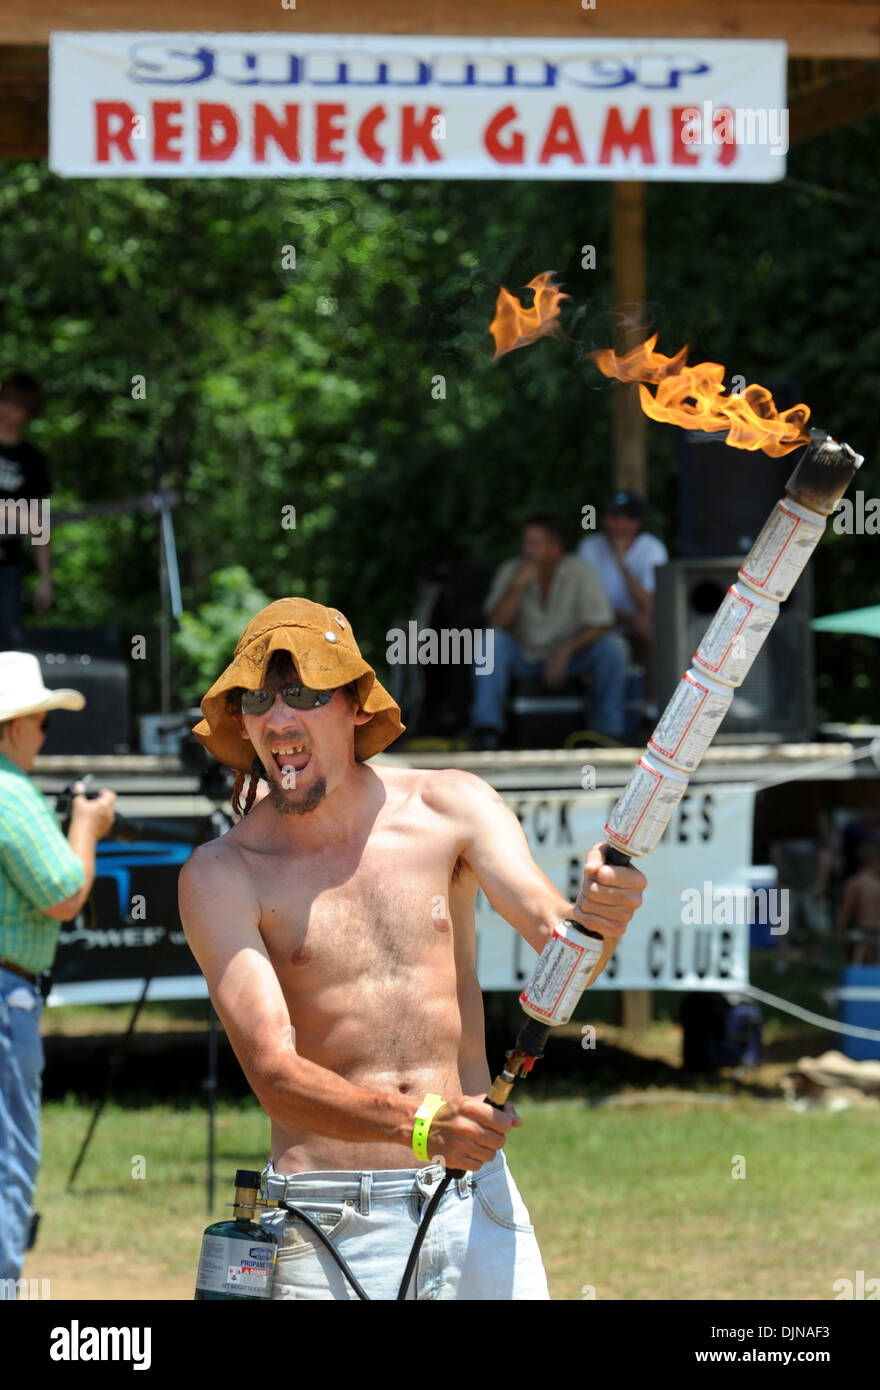 Mar 11, 2008 - East Dublin, Georgia, USA - Preston Wright holds the beer can torch during the opening ceremonies of the 13th annual Summer Redneck Games at Buckeye Park in East Dublin, Georgia, on Saturday. The annual homage to Southerners, began as a spoof to the 1996 Summer Olympics in Atlanta. Thousands of revelers attend the event whose events include bobbing for pigs feet, the Stock Photo